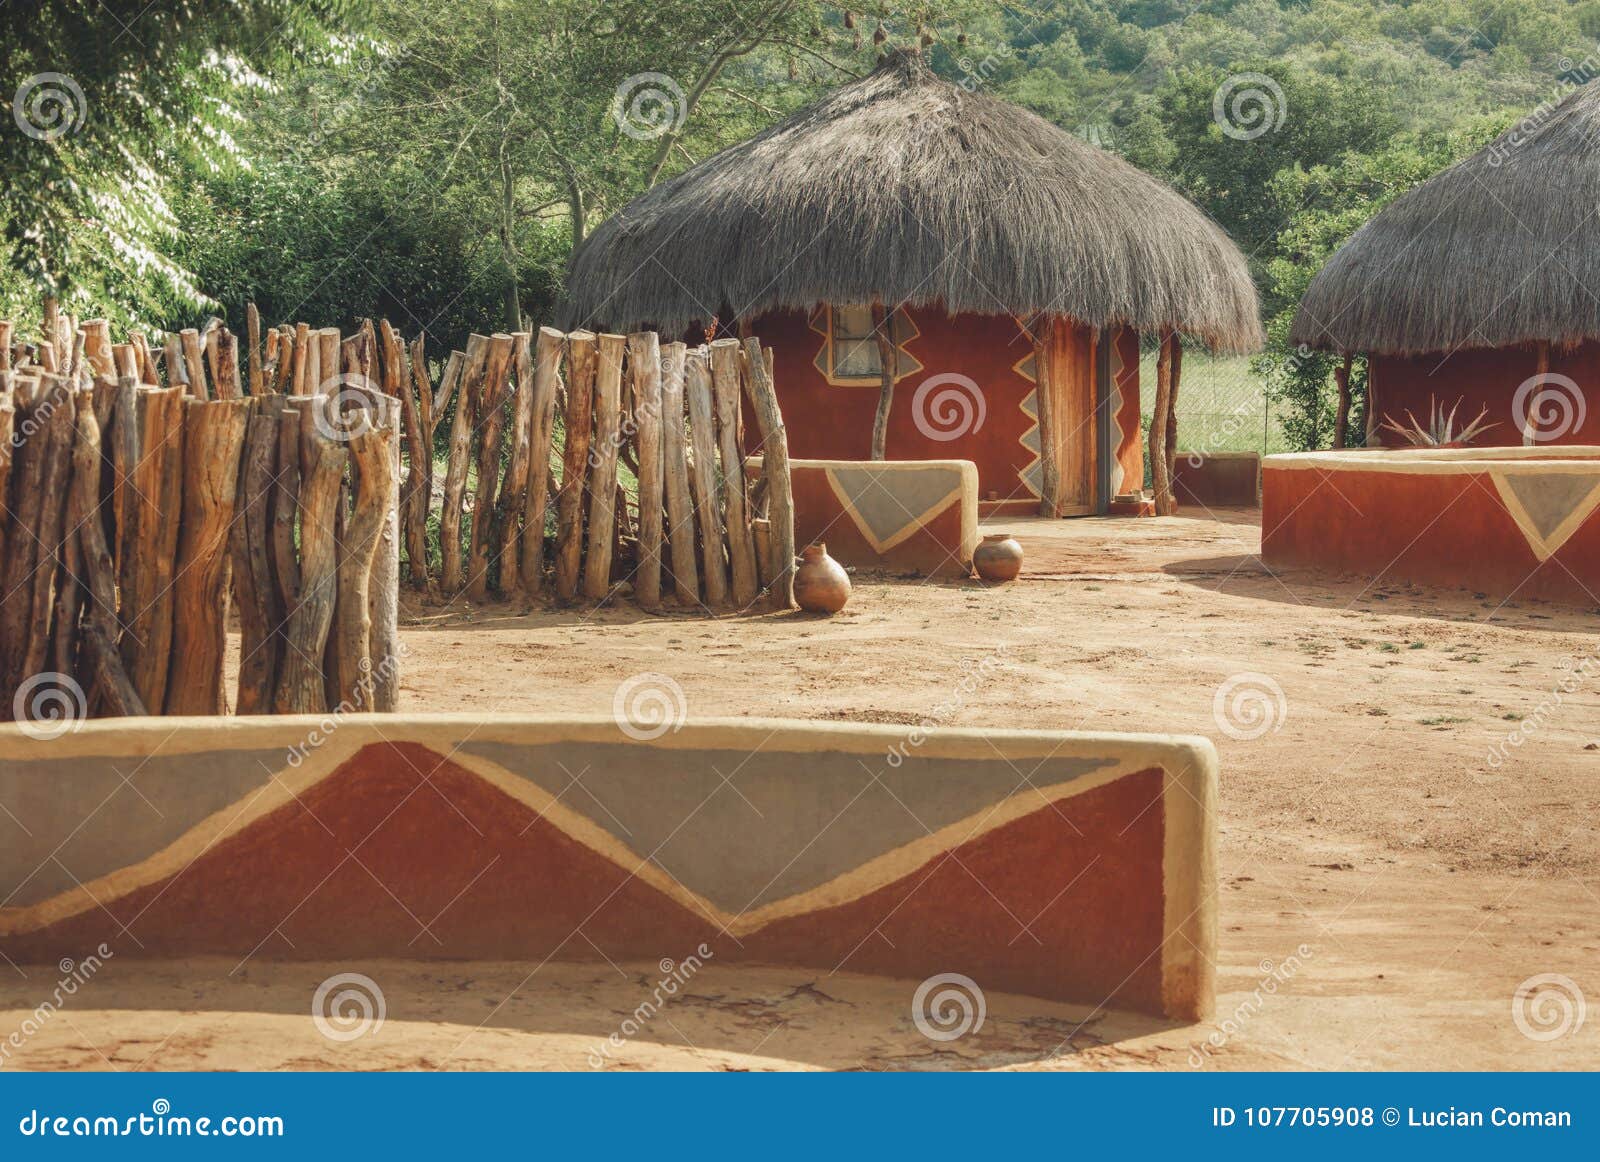 Thatched Roof African House Stock Photo Image of houses 